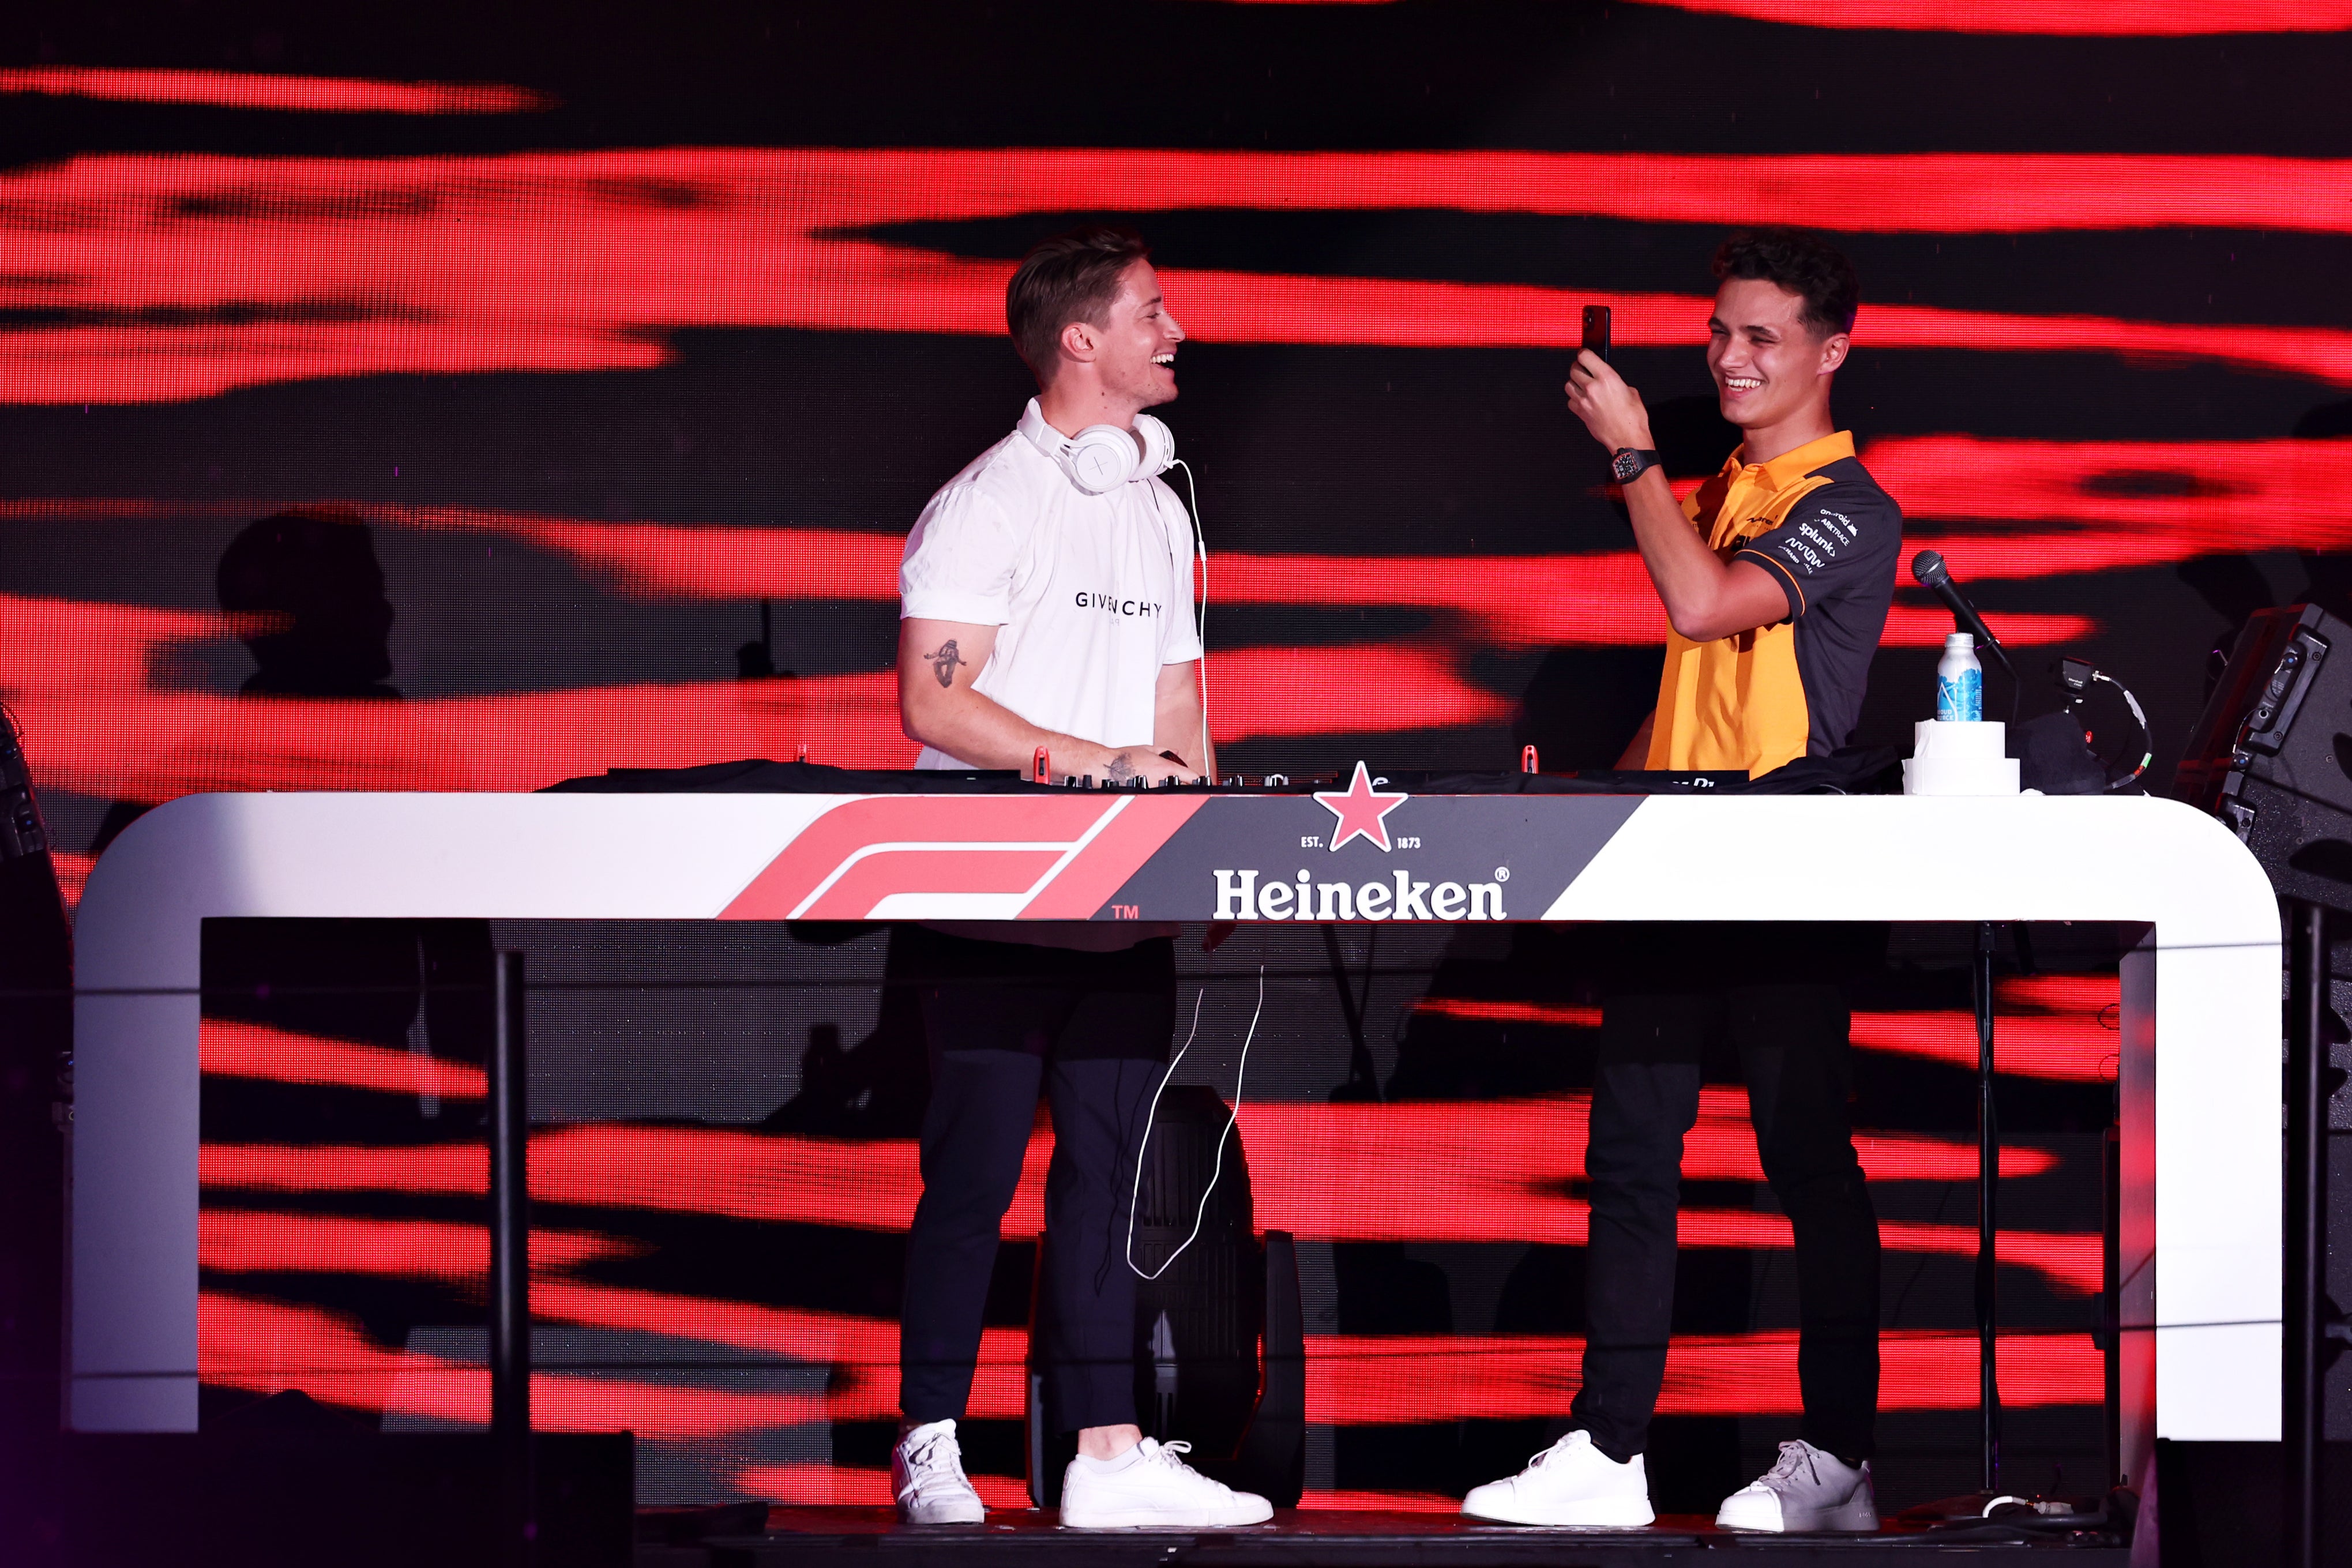 Kygo and Lando Norris perform on stage in Miami